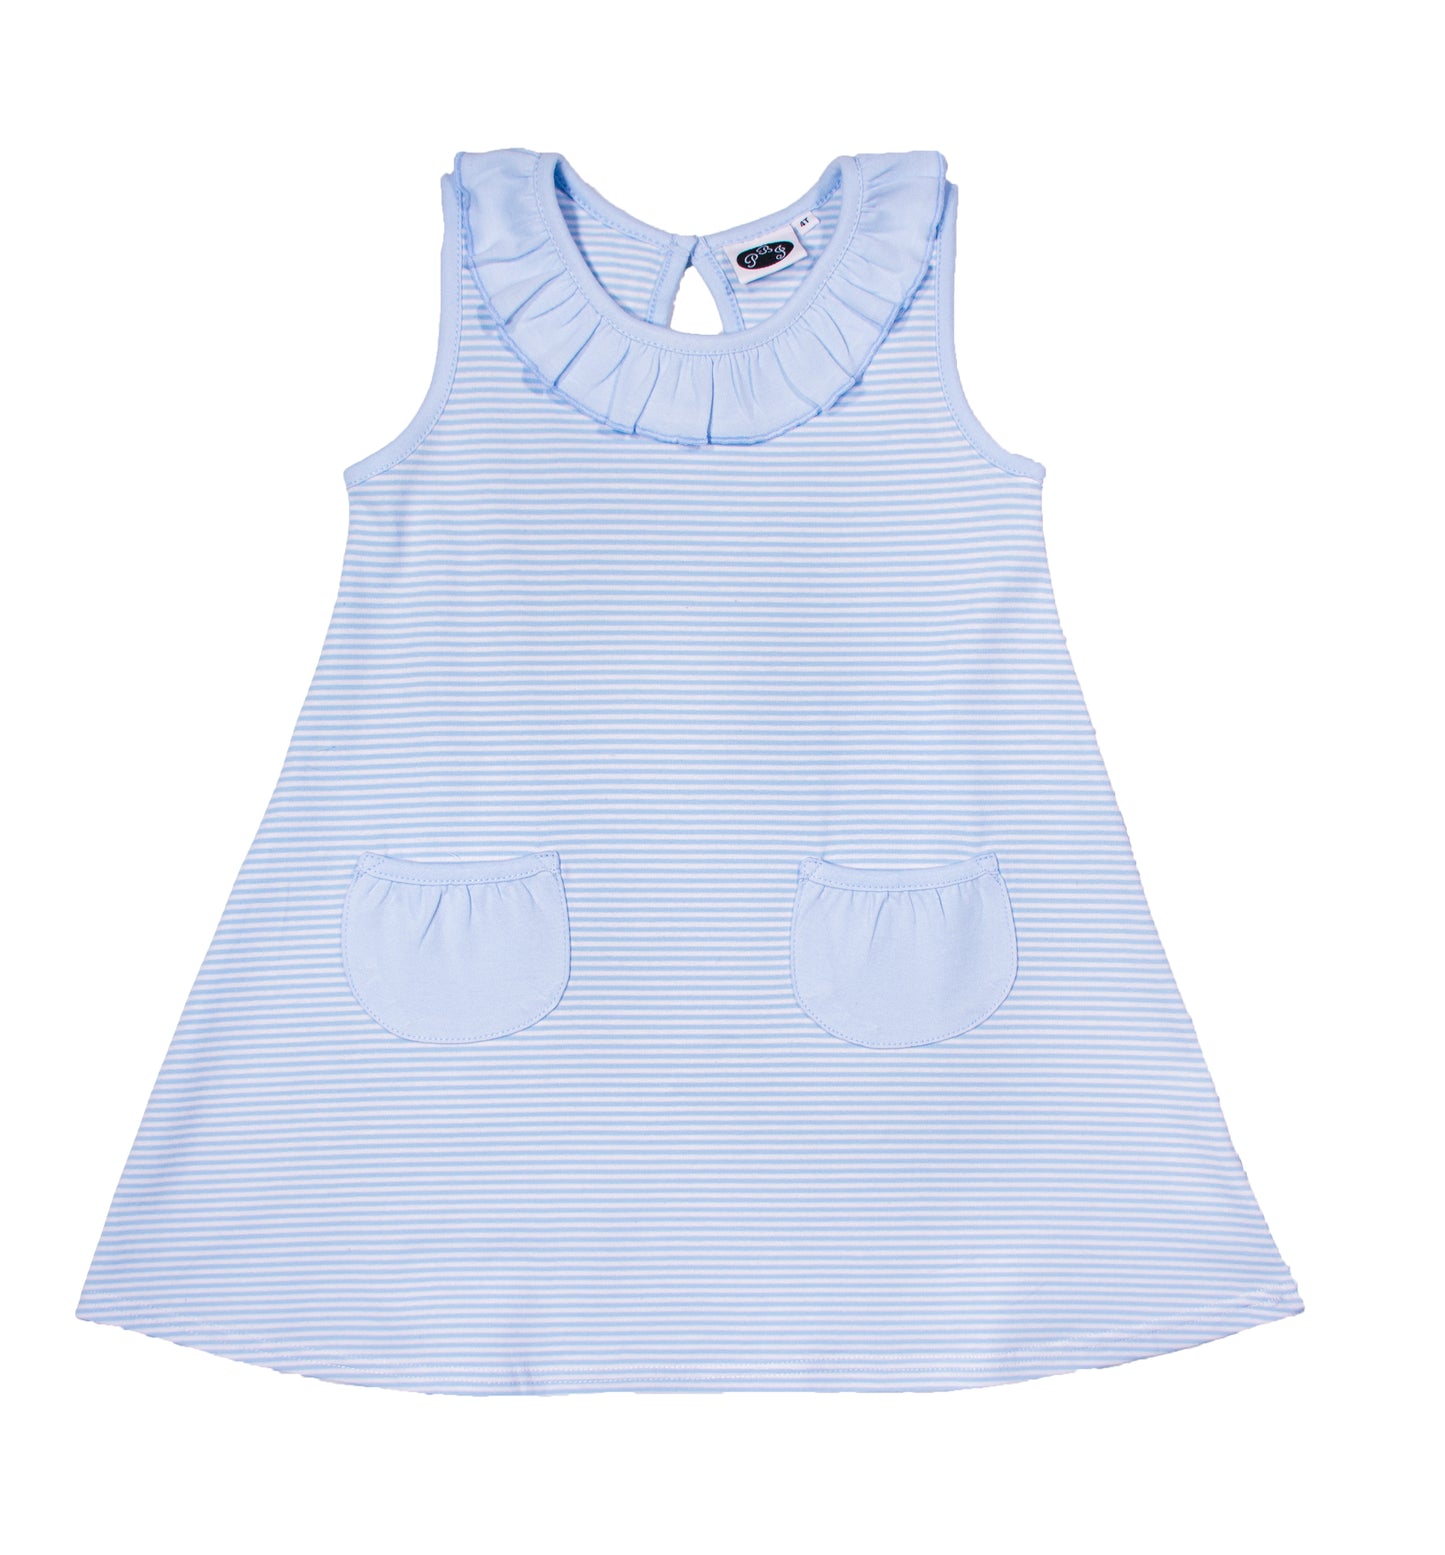 Swing Dress blue stripes with solid blue